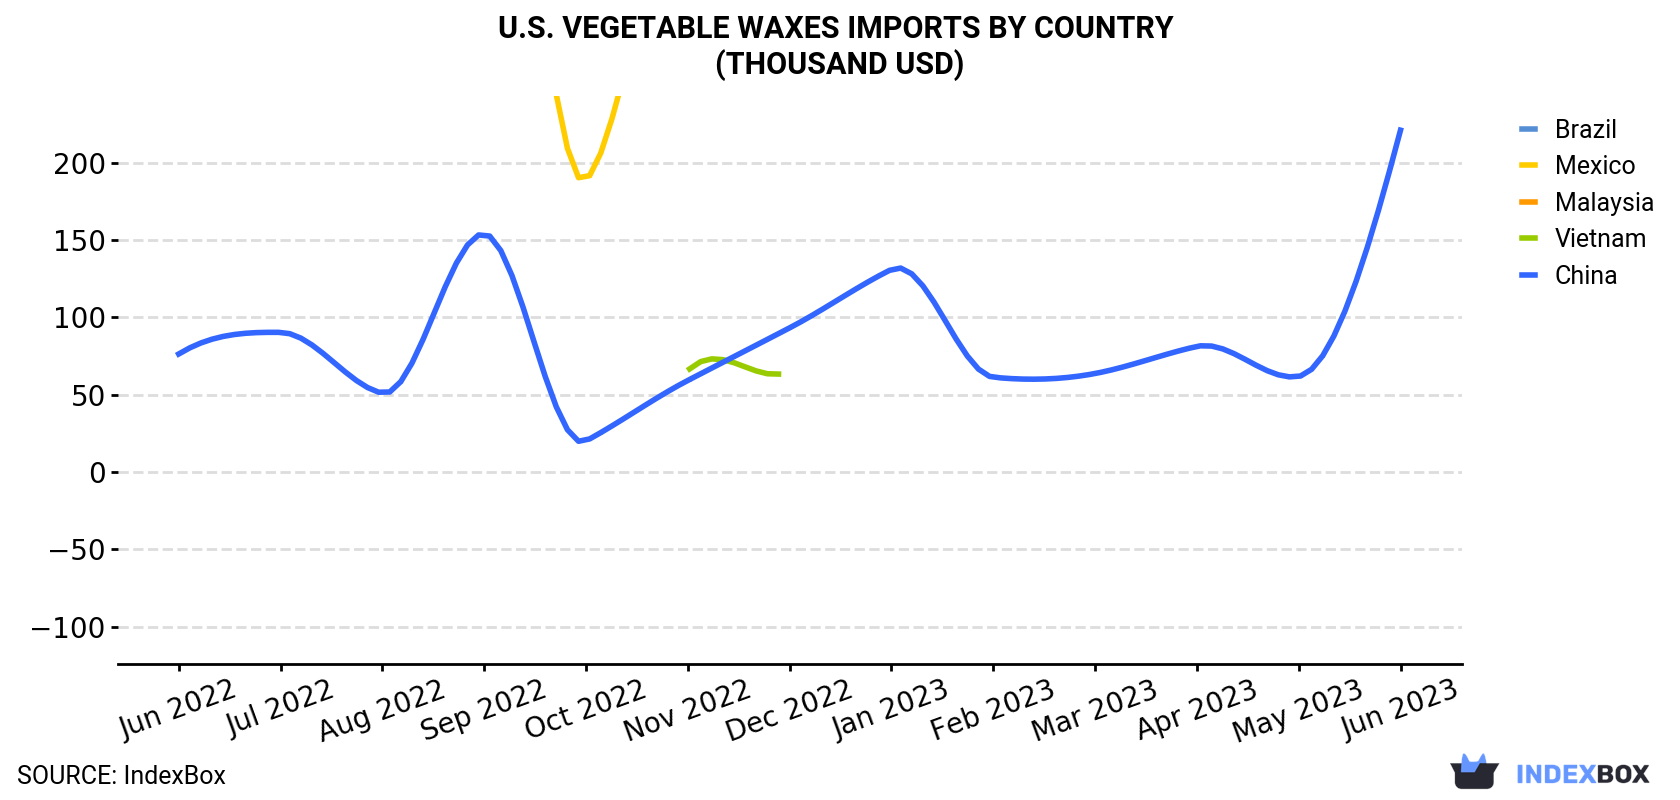 U.S. Vegetable Waxes Imports By Country (Thousand USD)